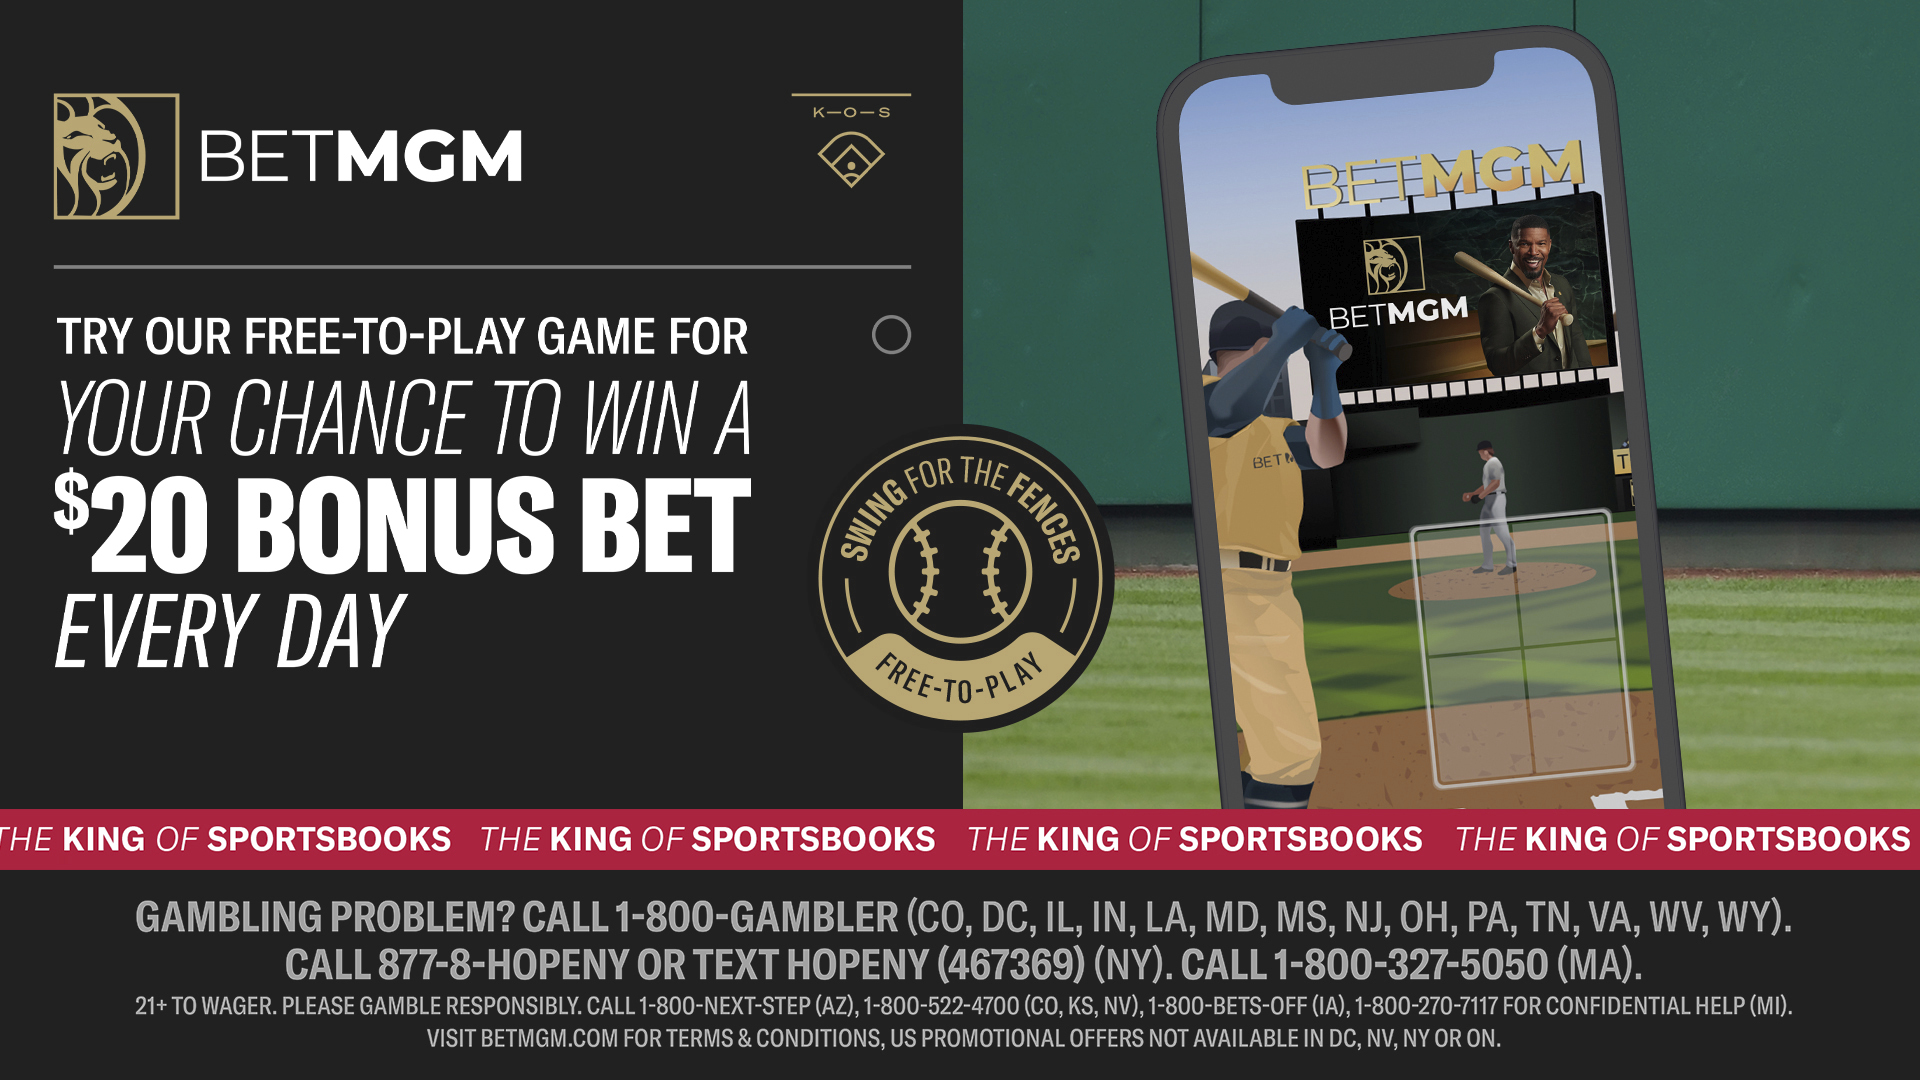 Win Bonus Bets and Tokens With This Free Daily BetMGM Game BetQL